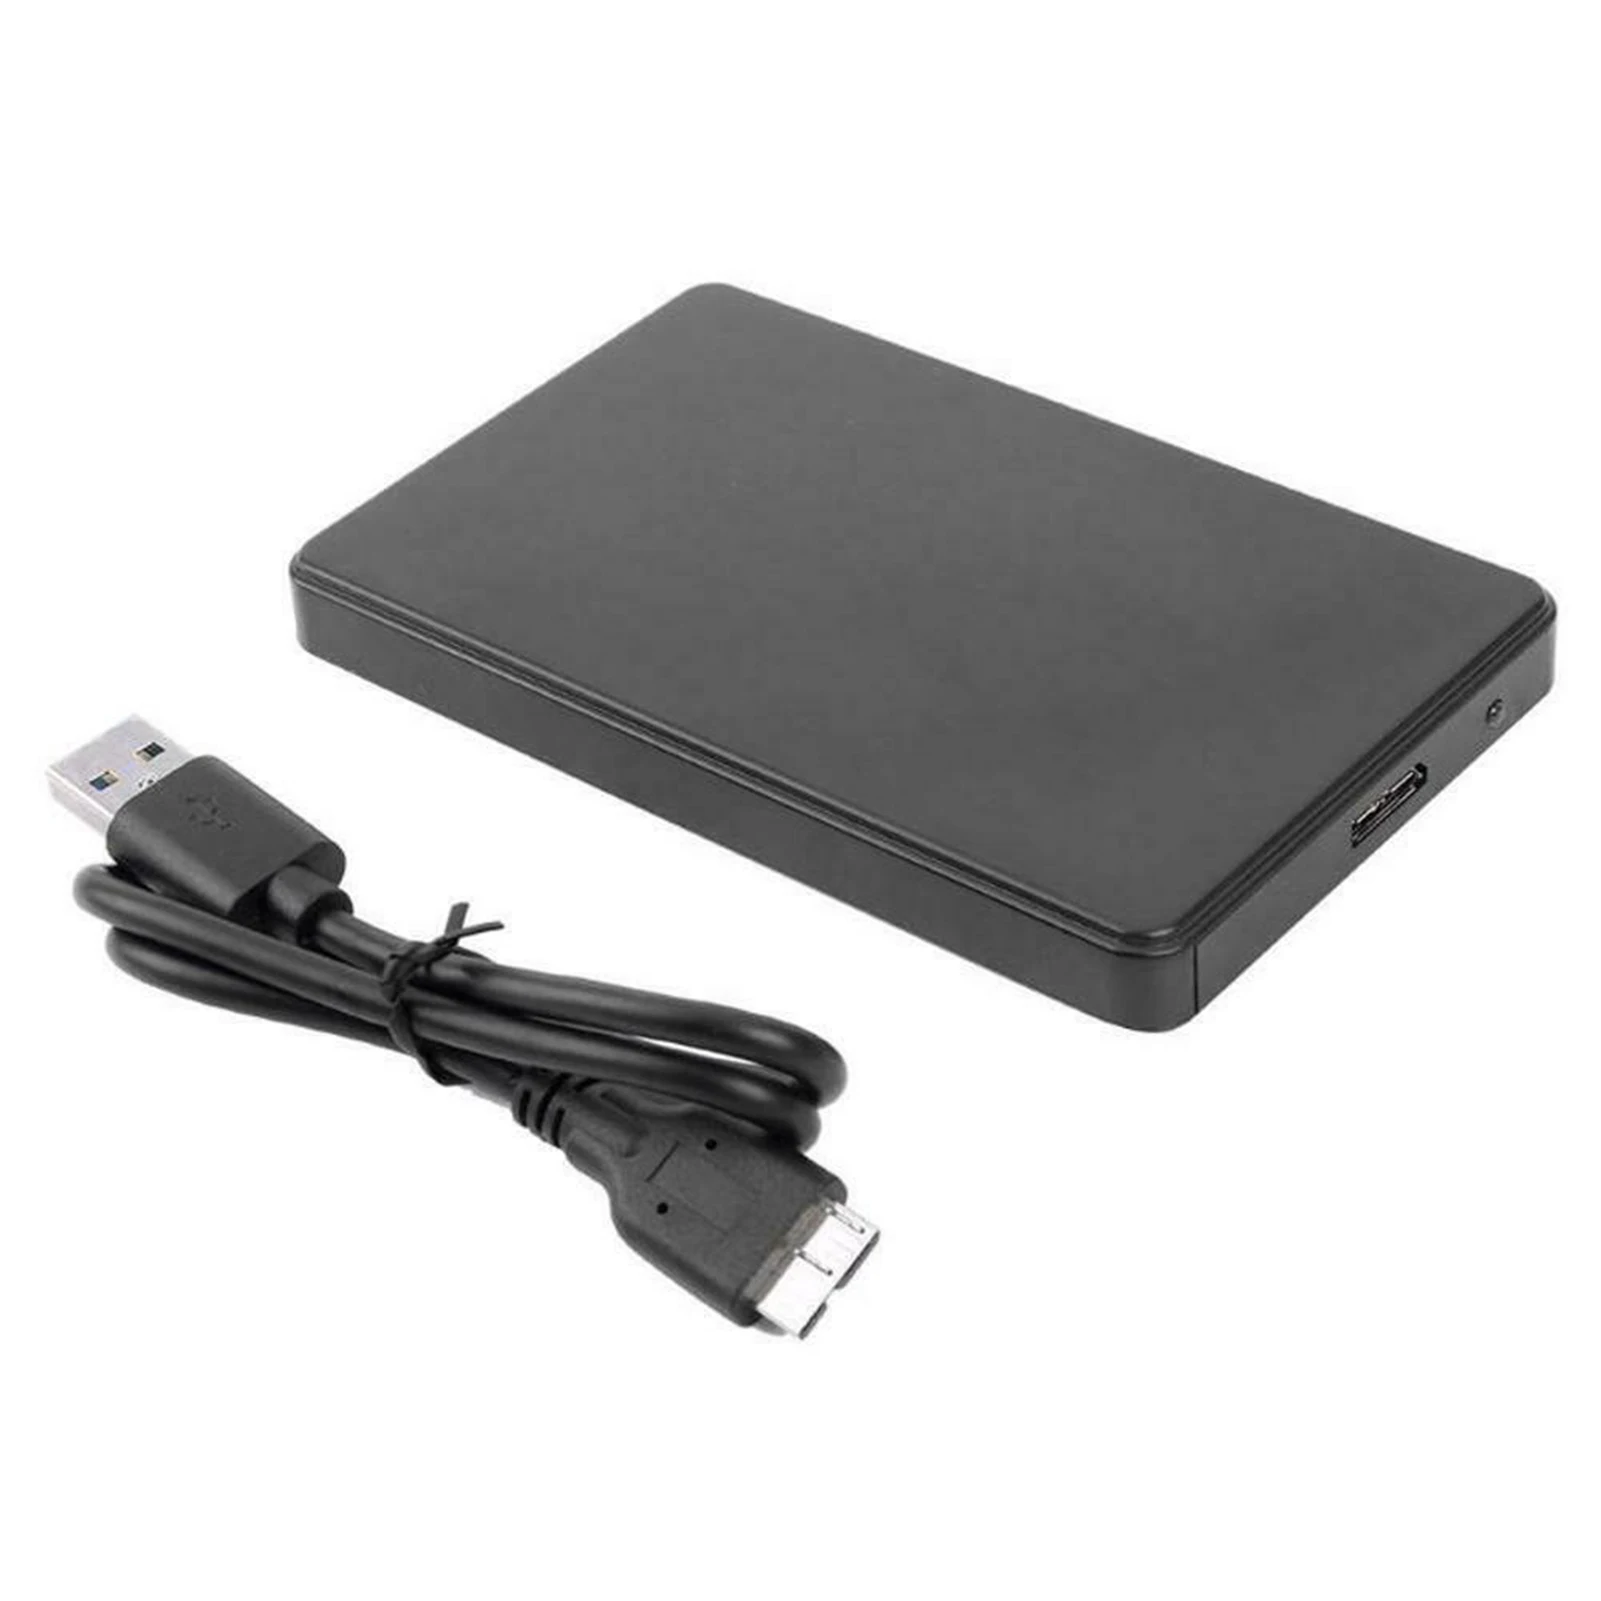 2.5inch HDD CASE Enclosure 2T USB 3.0/2.0 5Gbps SATA External Closure SSD HDD Hard Disk CASE Box for PC Laptop images - 6